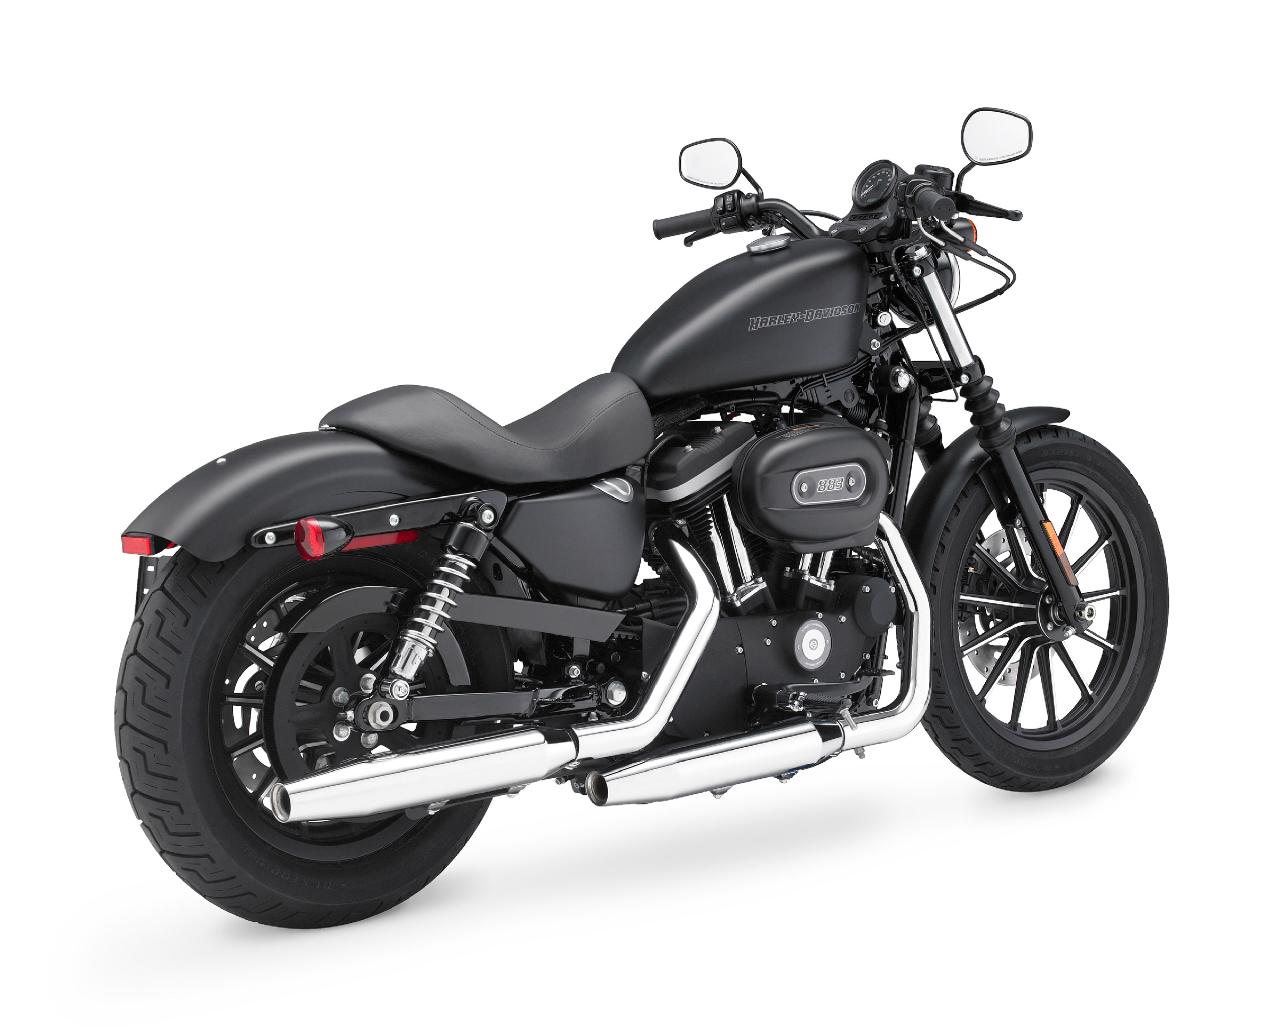  Harley  Davidson  IRON  883  India  Specifications Features Price 